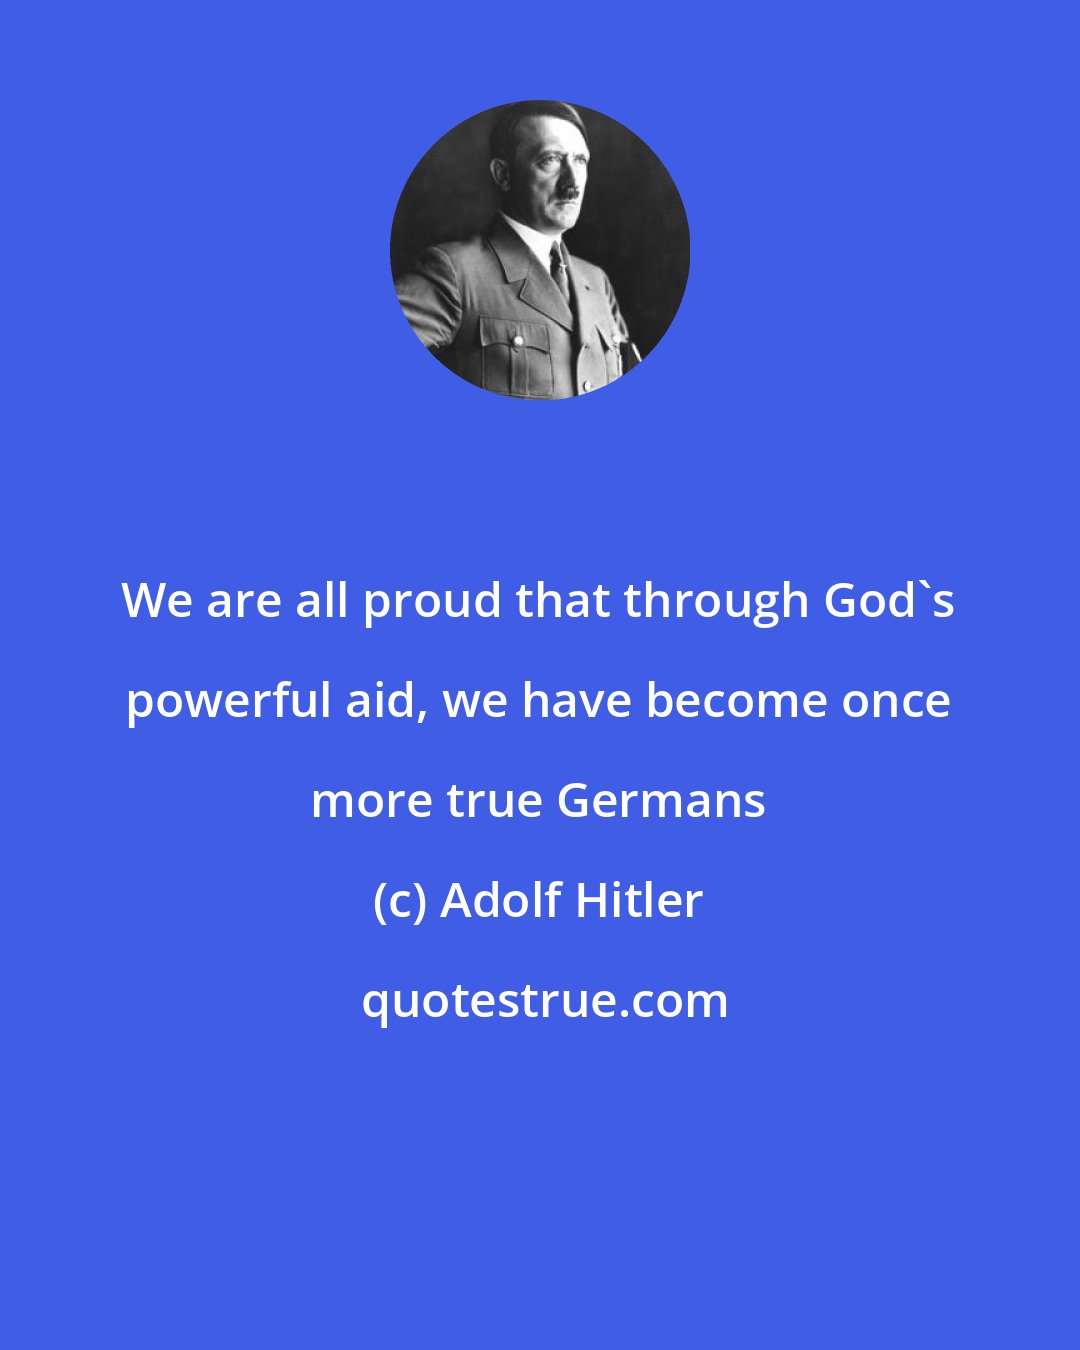 Adolf Hitler: We are all proud that through God's powerful aid, we have become once more true Germans